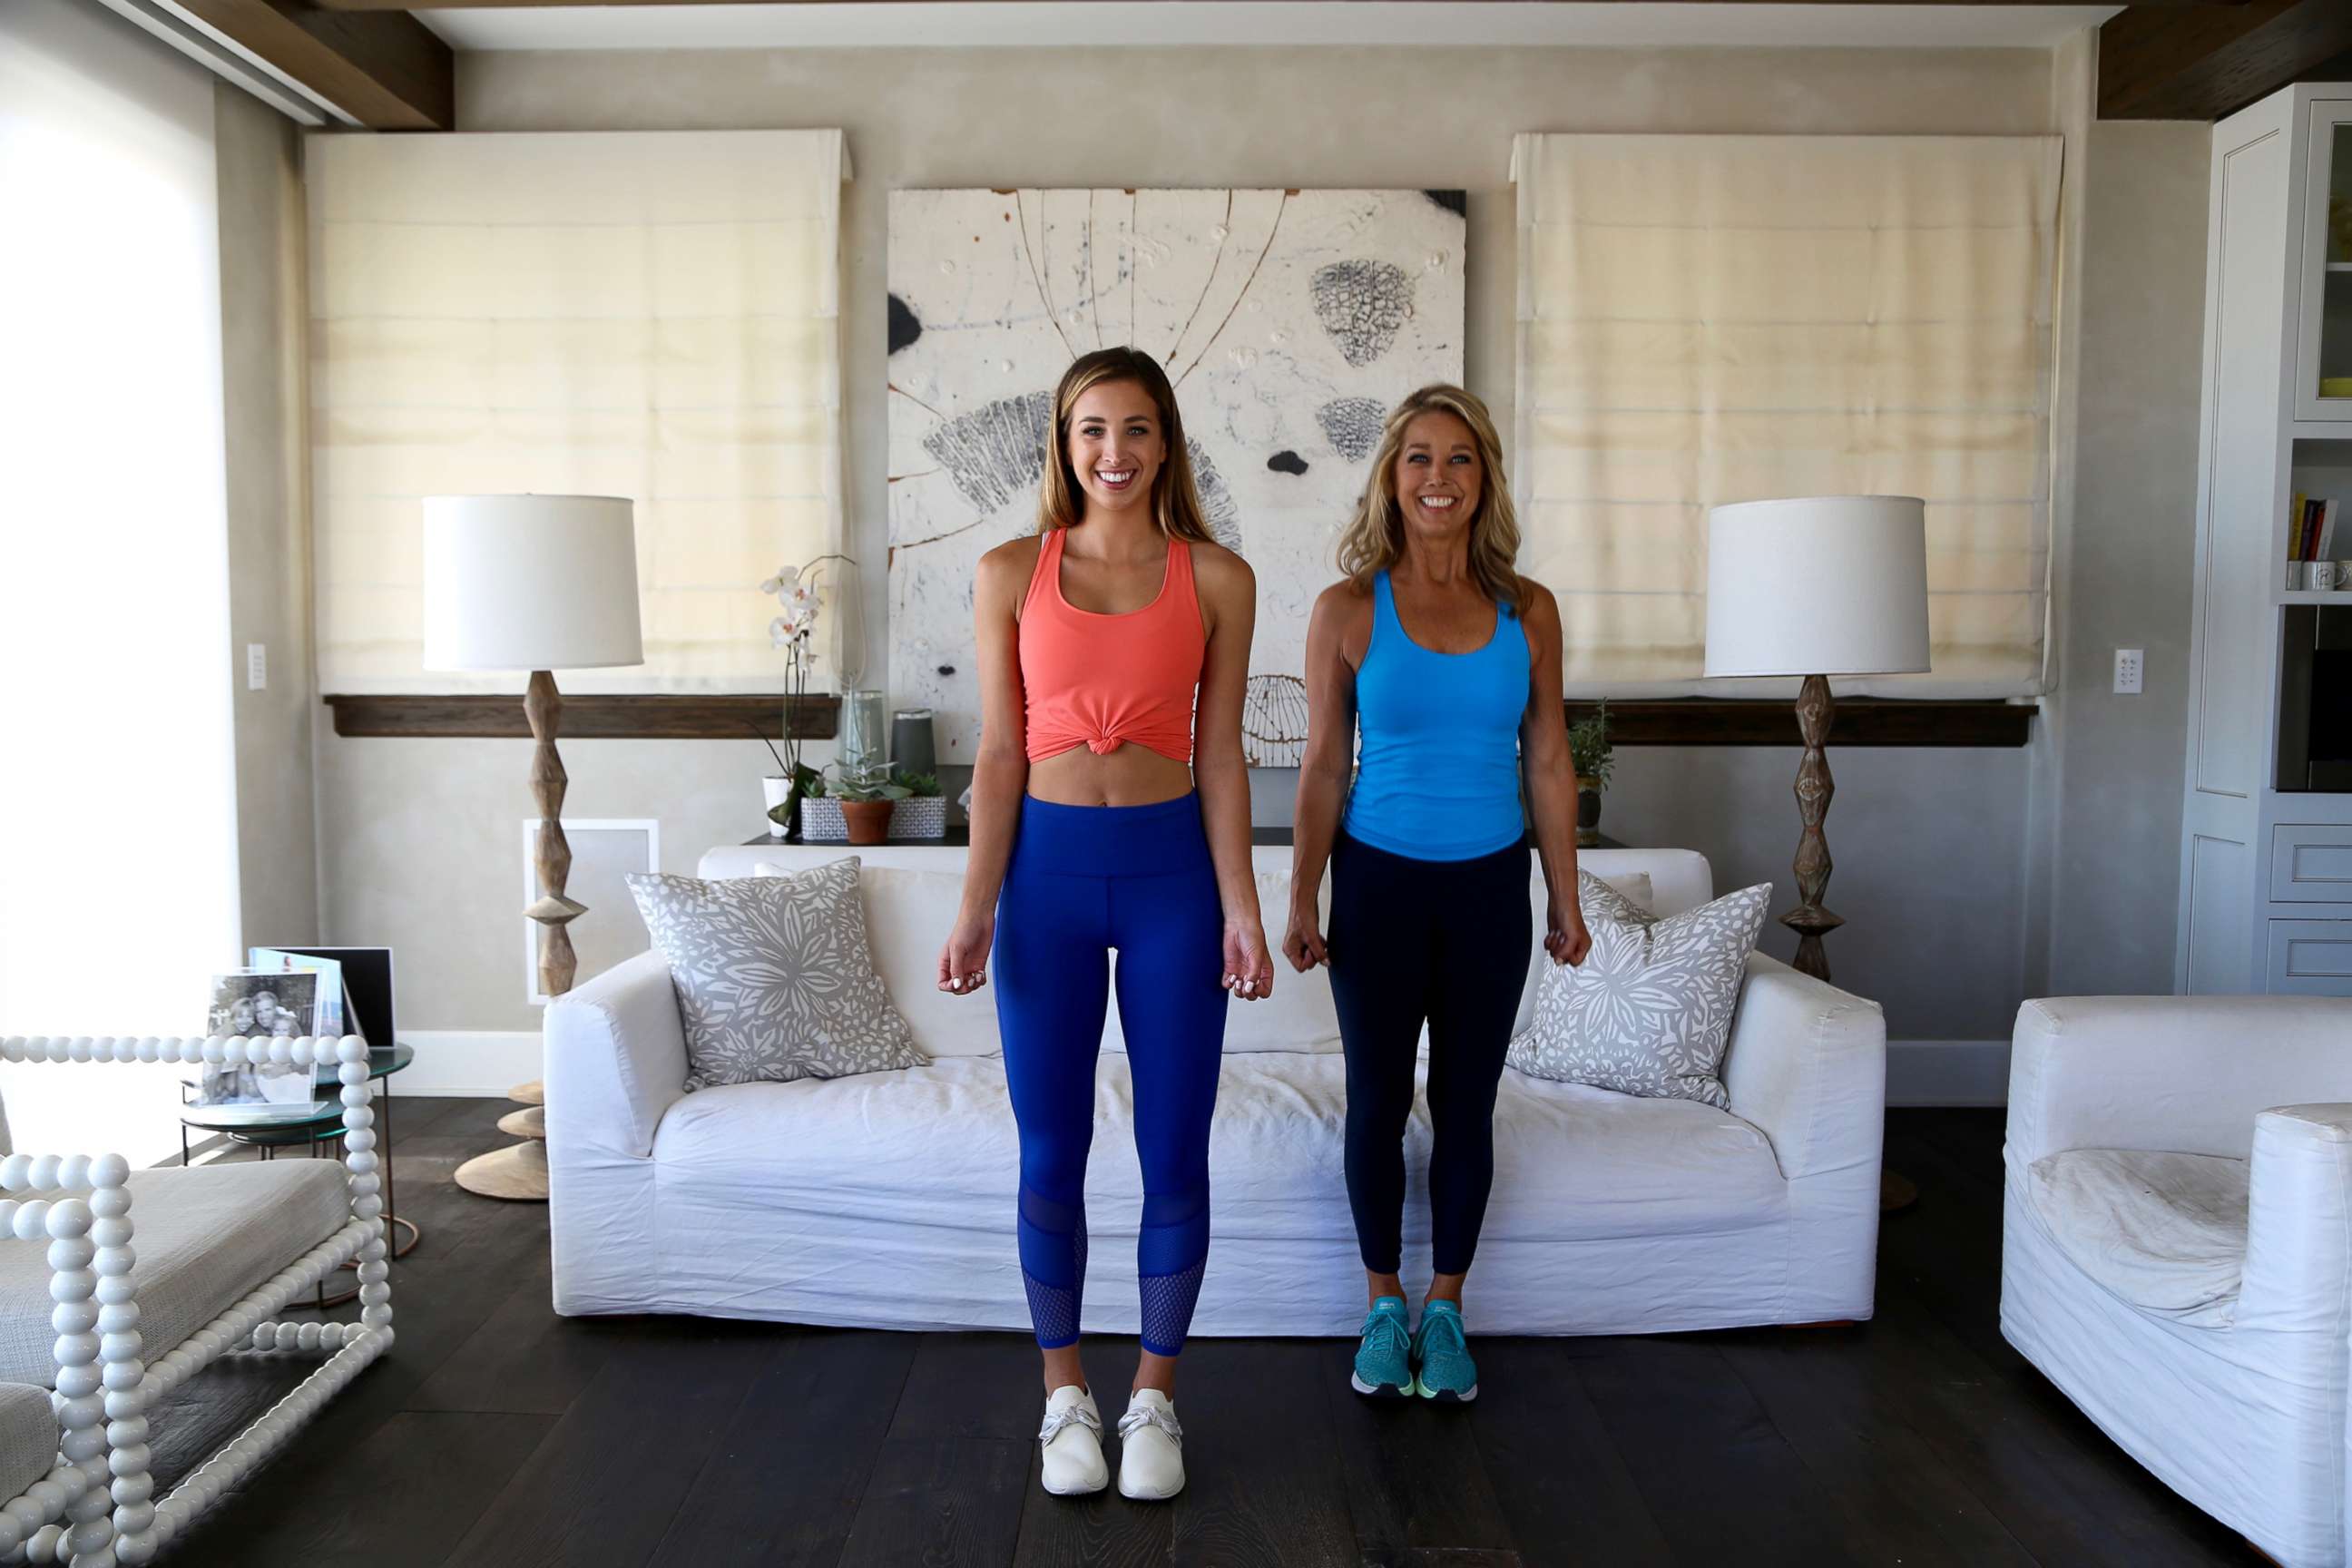 PHOTO: Katie Austin and Denise Austin share a Mother's Day workout.